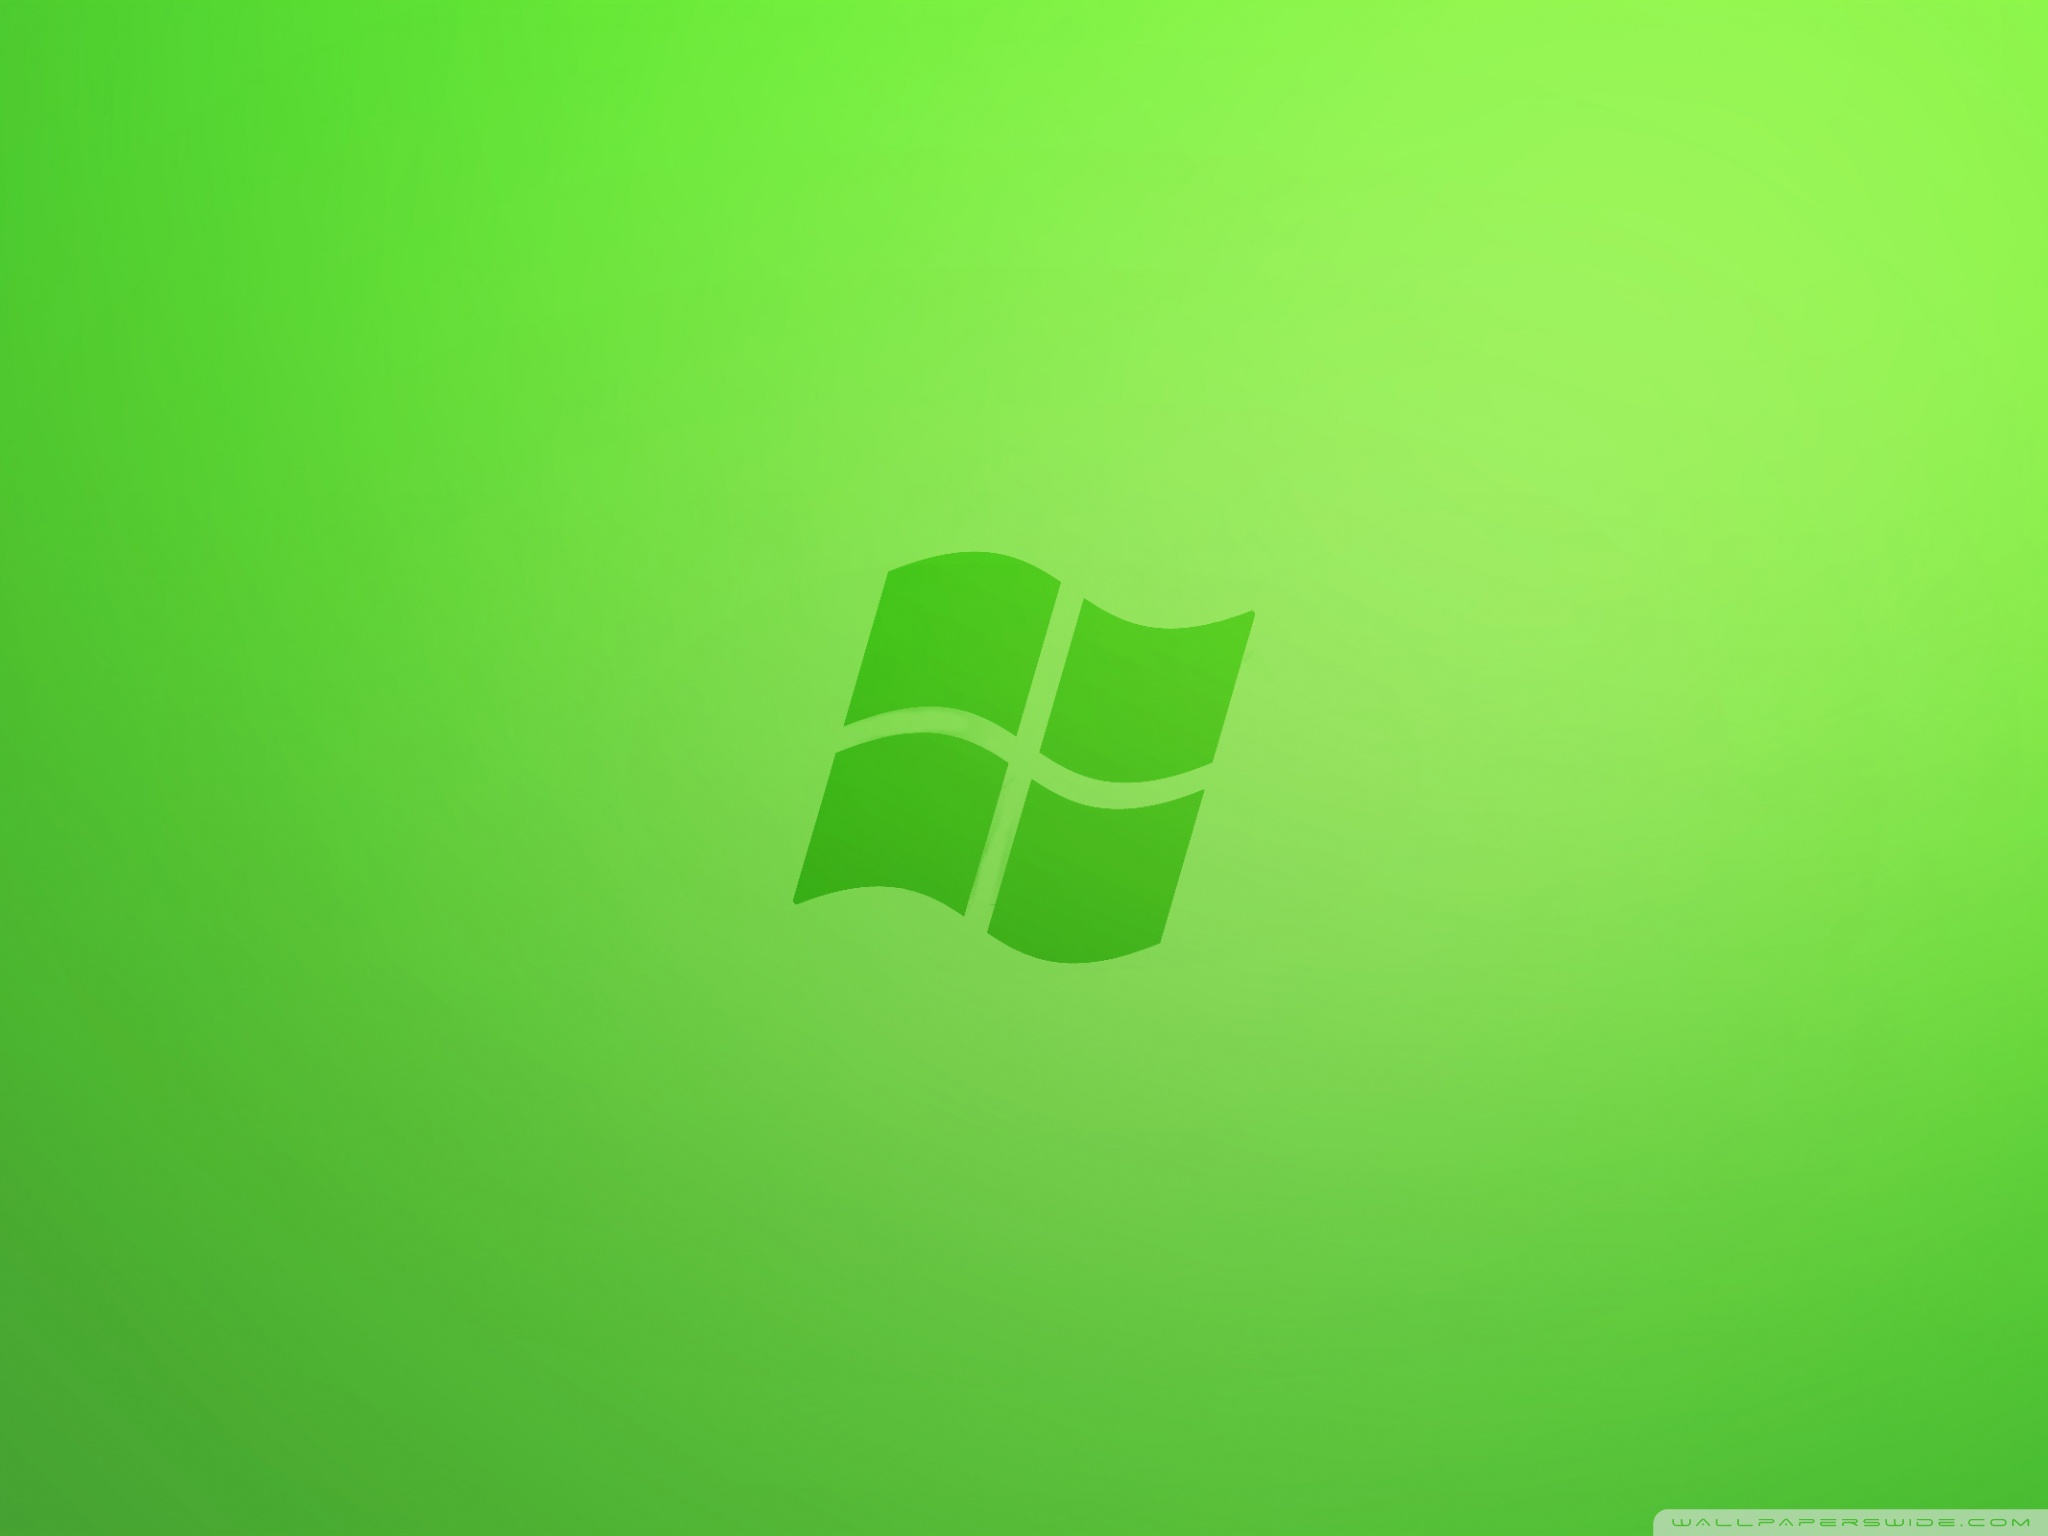 hd wallpapers windows 8 mobile